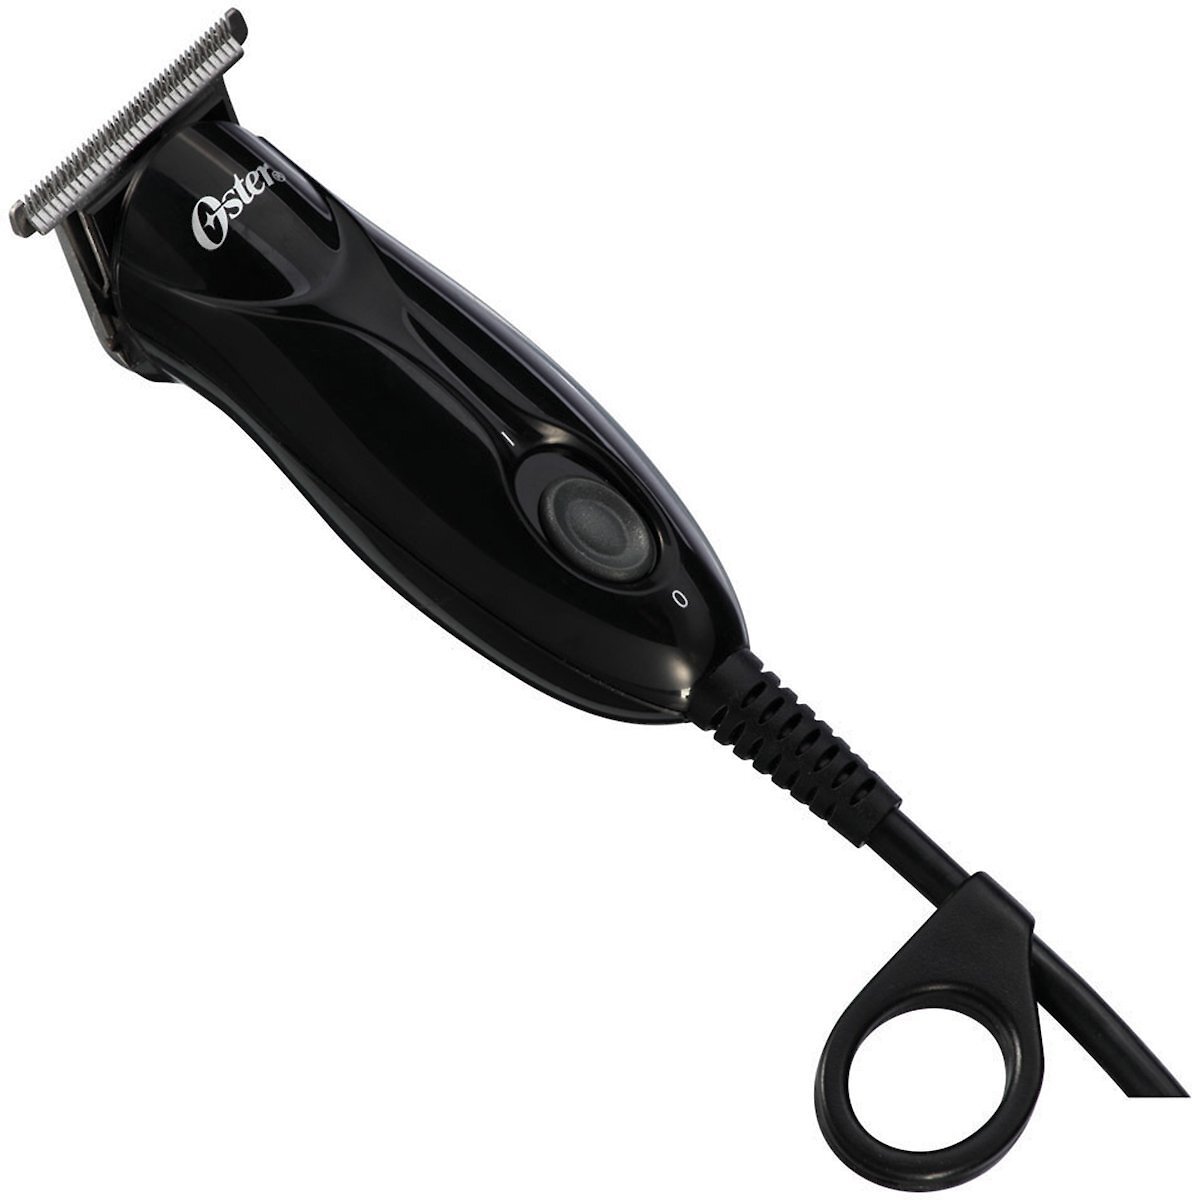 oster professional dog clippers